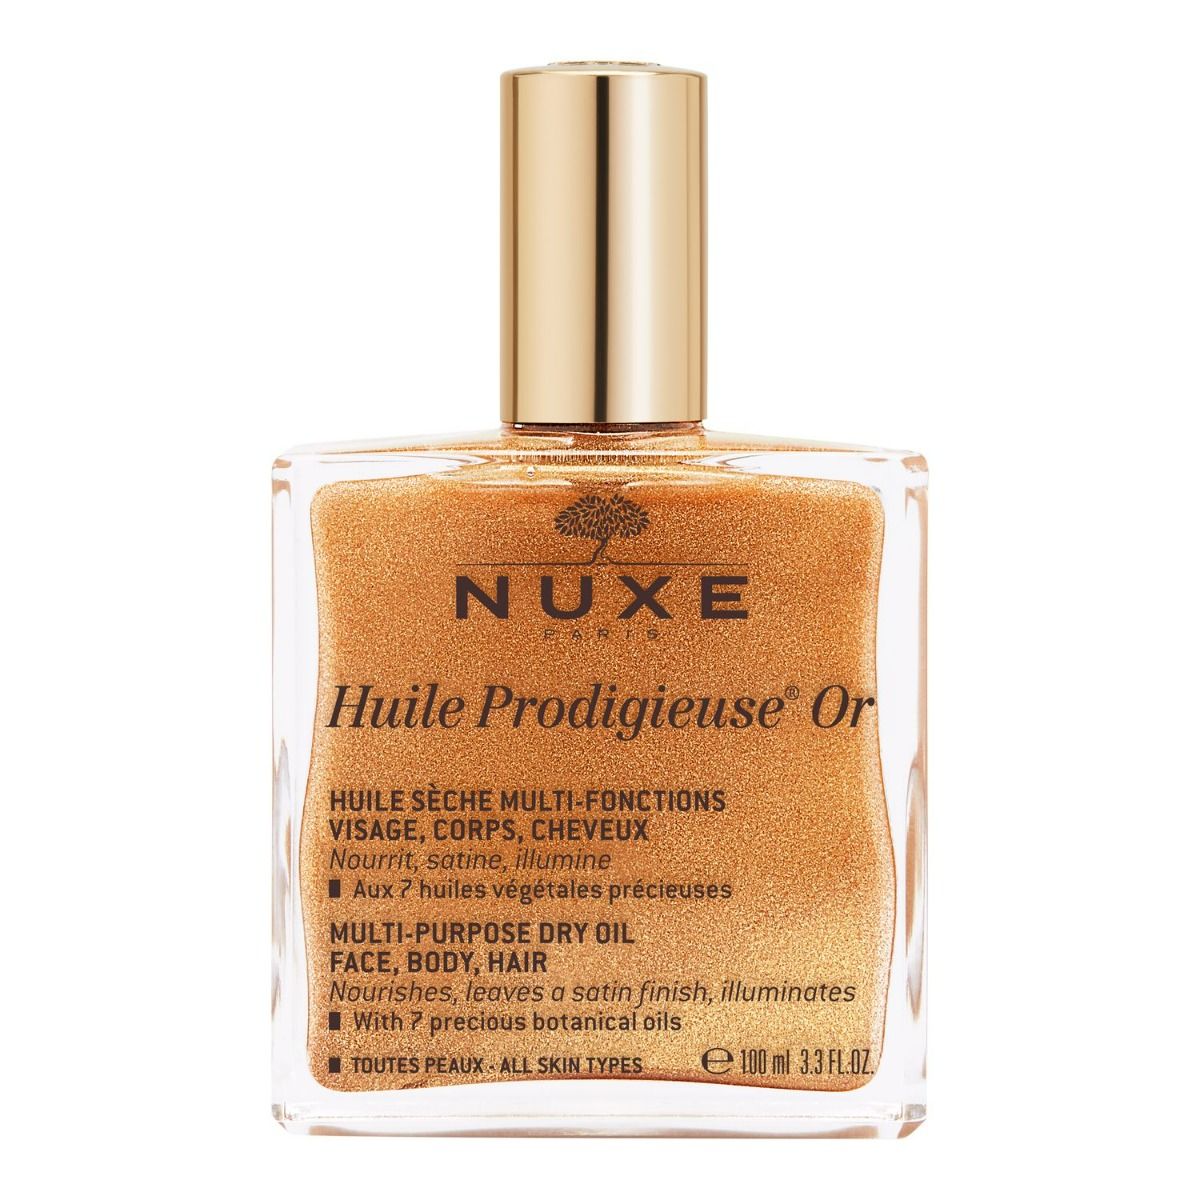 Nuxe Huile Prodigieuse Or масло для лица, тела и волос, 100 ml nuxe масло для тела huile prodigieuse florale 100 мл